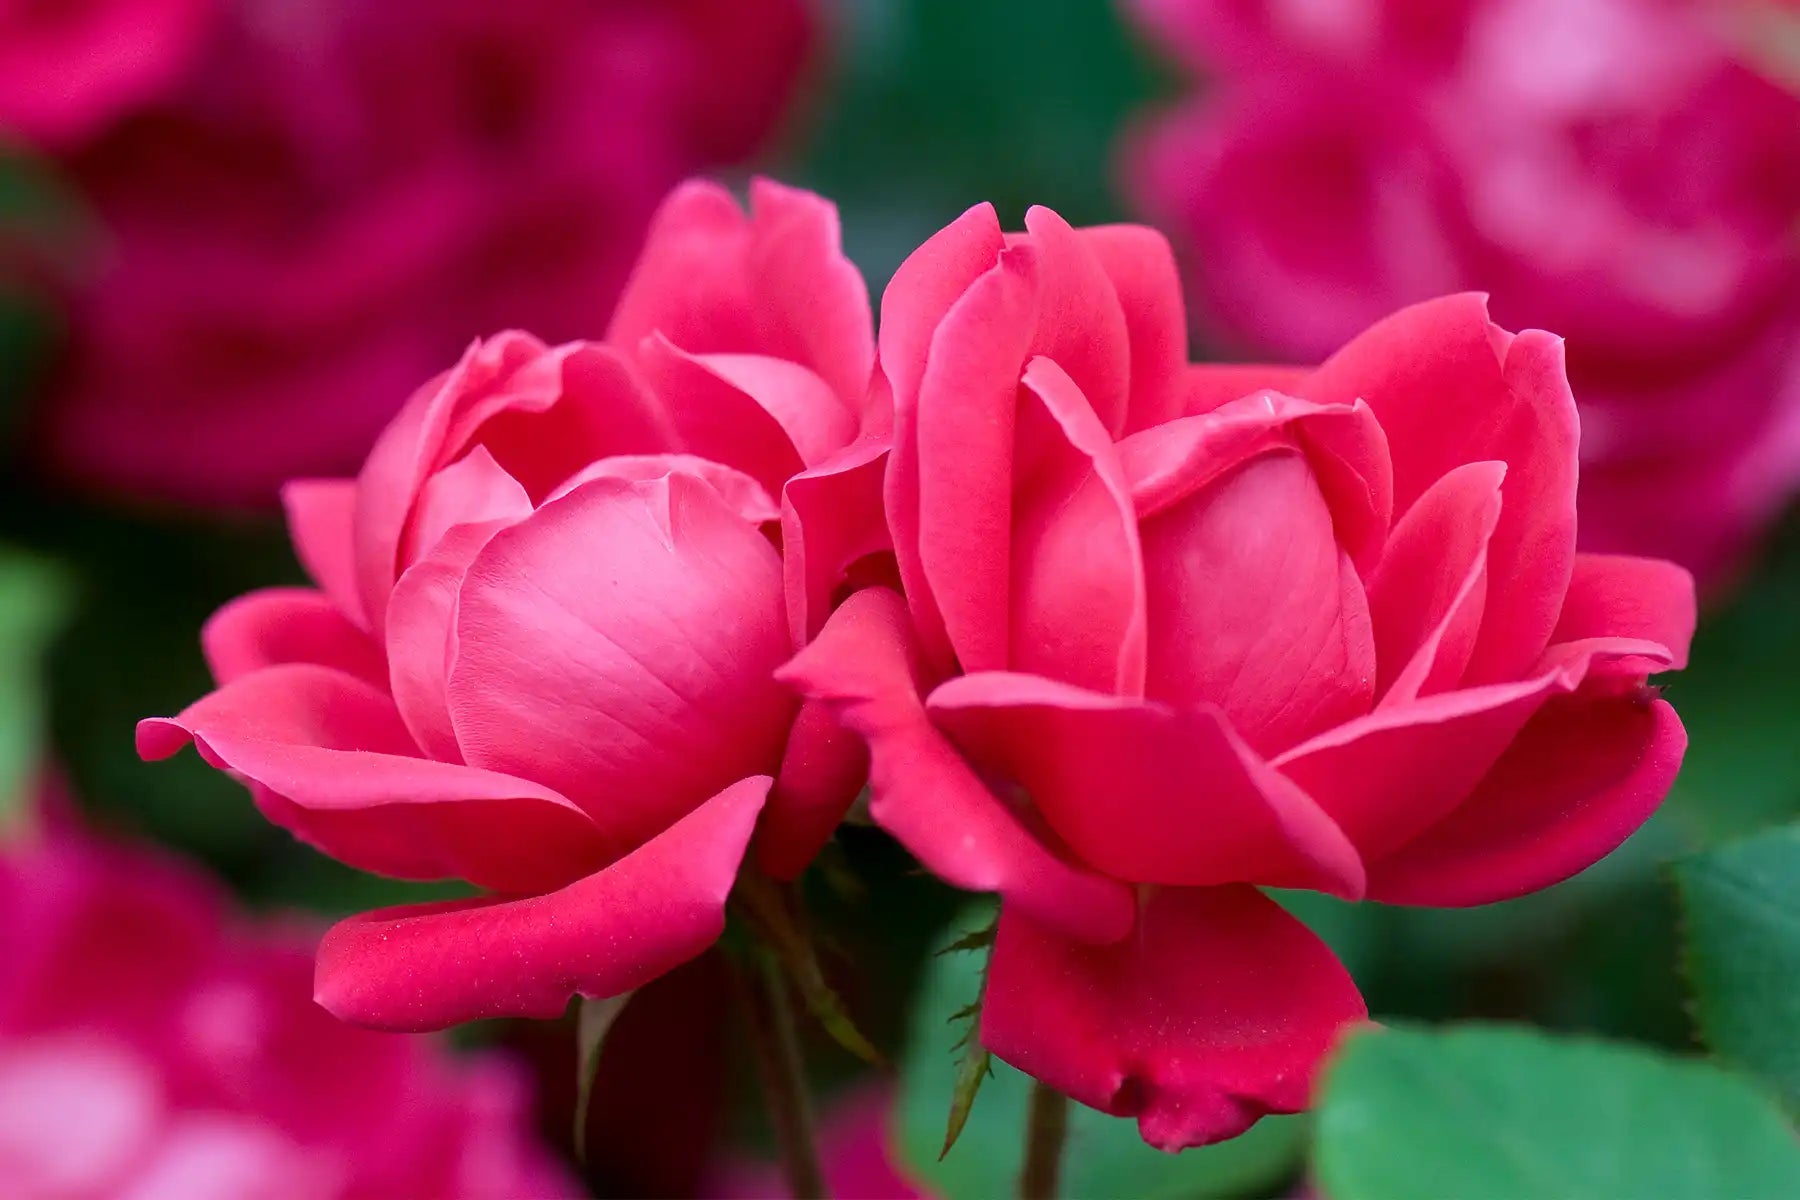 These Doubke Knock Out® Rose plants show off their characteristic pinkish red, fully double flowers in closeup. They they look just like classic, heirloom roses but these will continue to bloom from spring to fall.